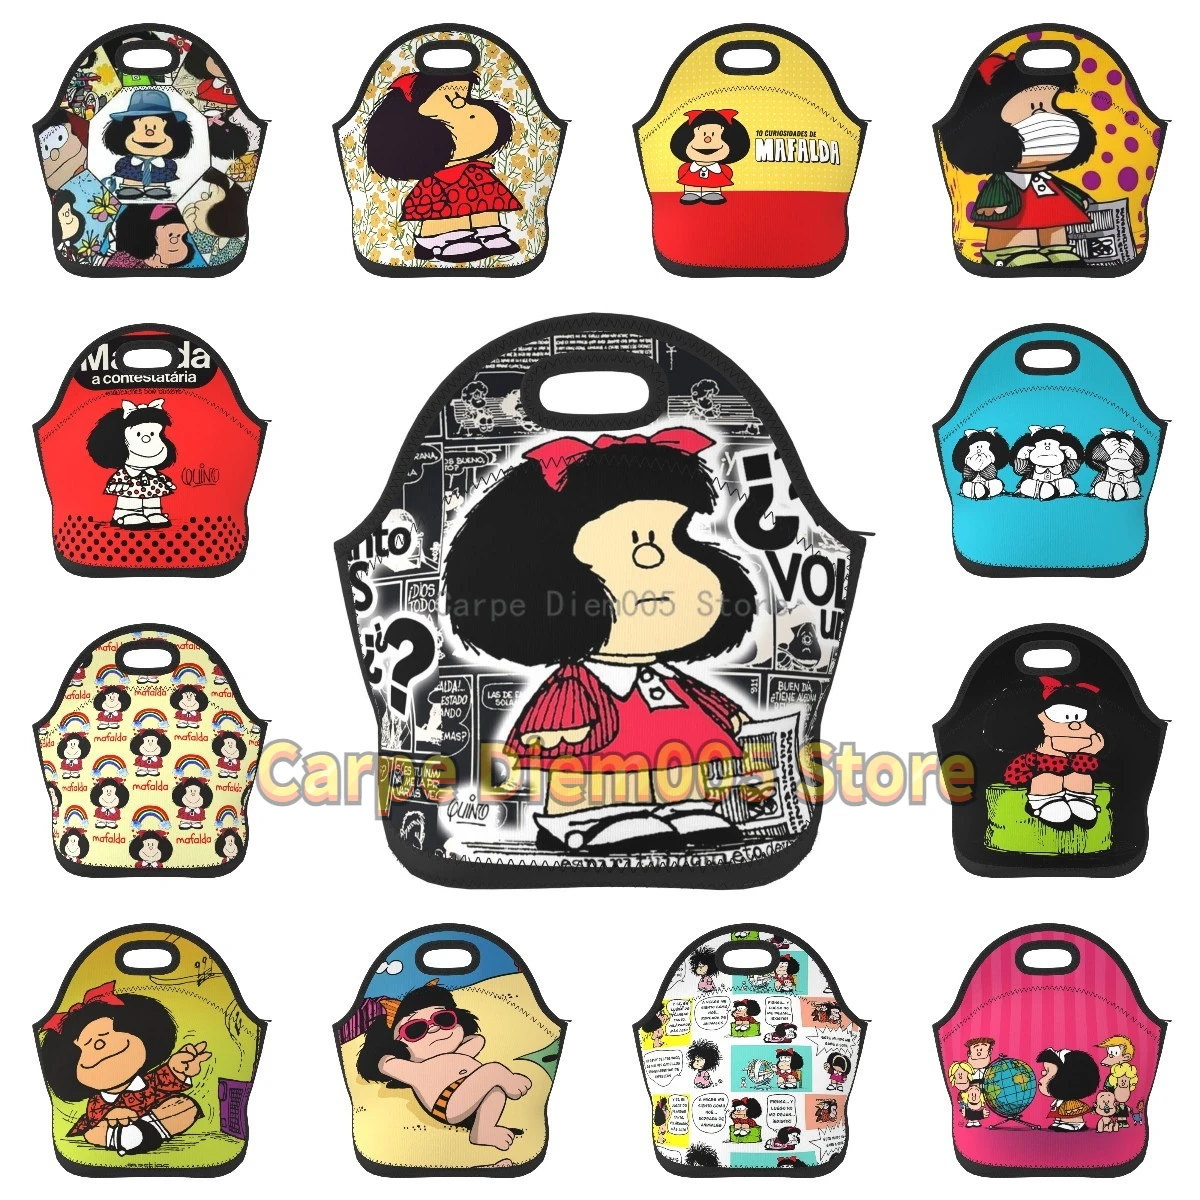 Funny Mafalda Neoprene Lunch Bag/Lunch Box/Lunch Tote/Picnic Bags Insulated Cooler Travel Organizer School Work Office